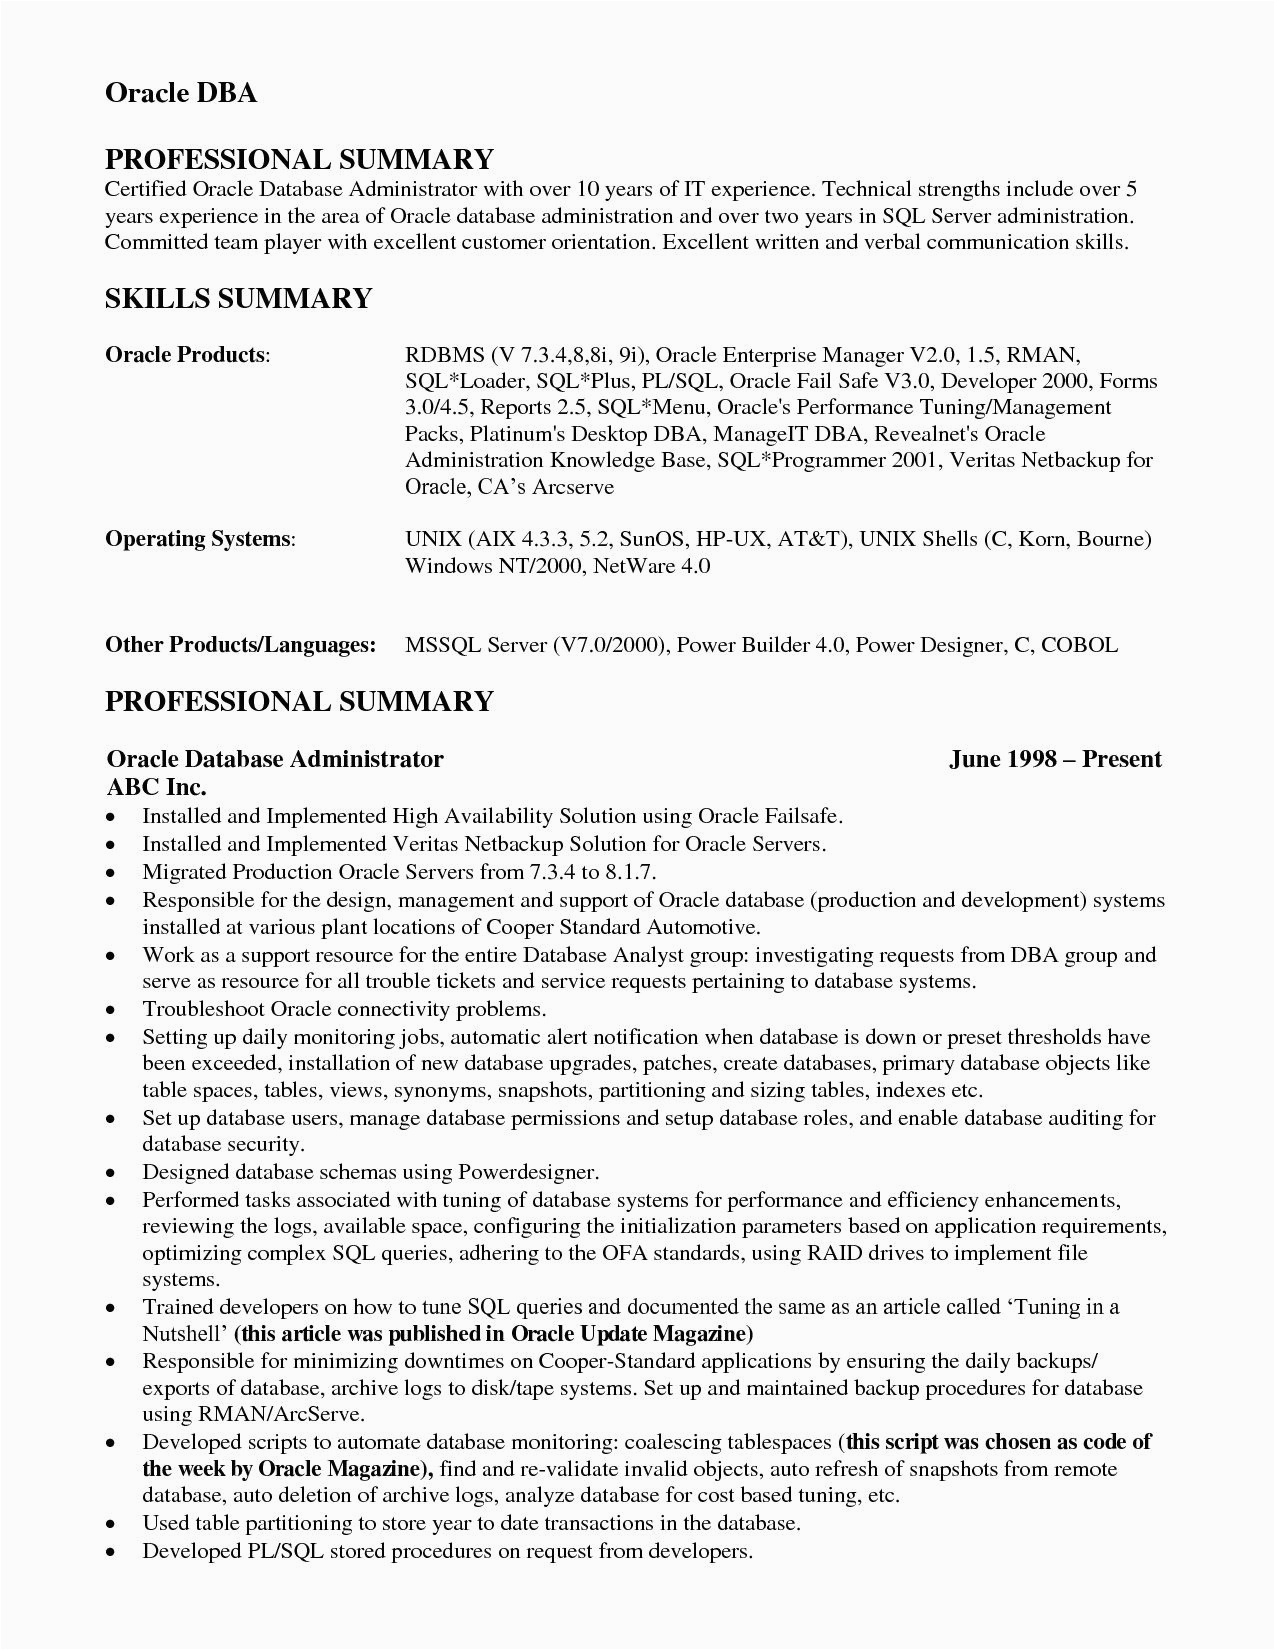 Sample Resume for Dot Net Developer Experience 10 Years Over 10 Years Experience